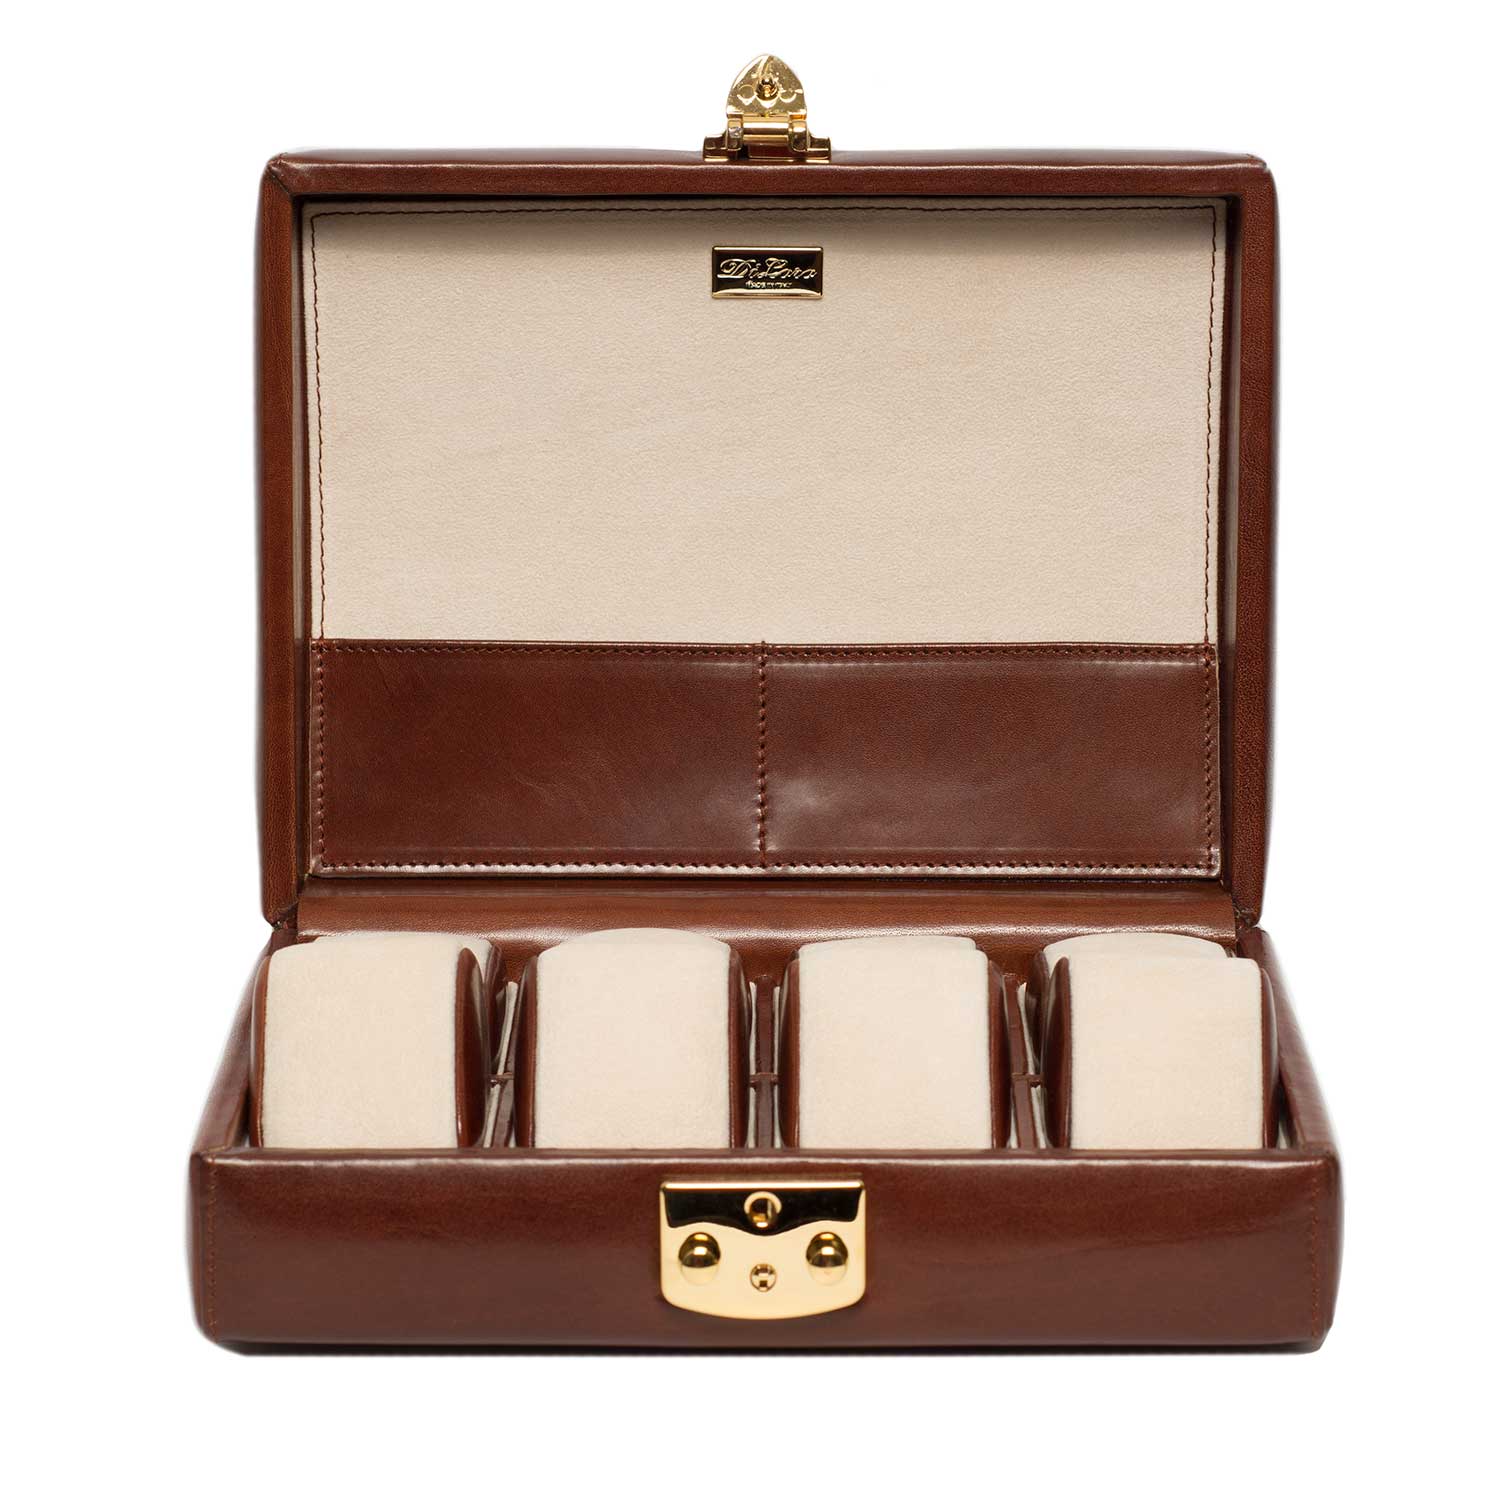 DiLoro Italian Leather Travel Watch Case Holds Eight Watches in Coffee Brown - Front, Open